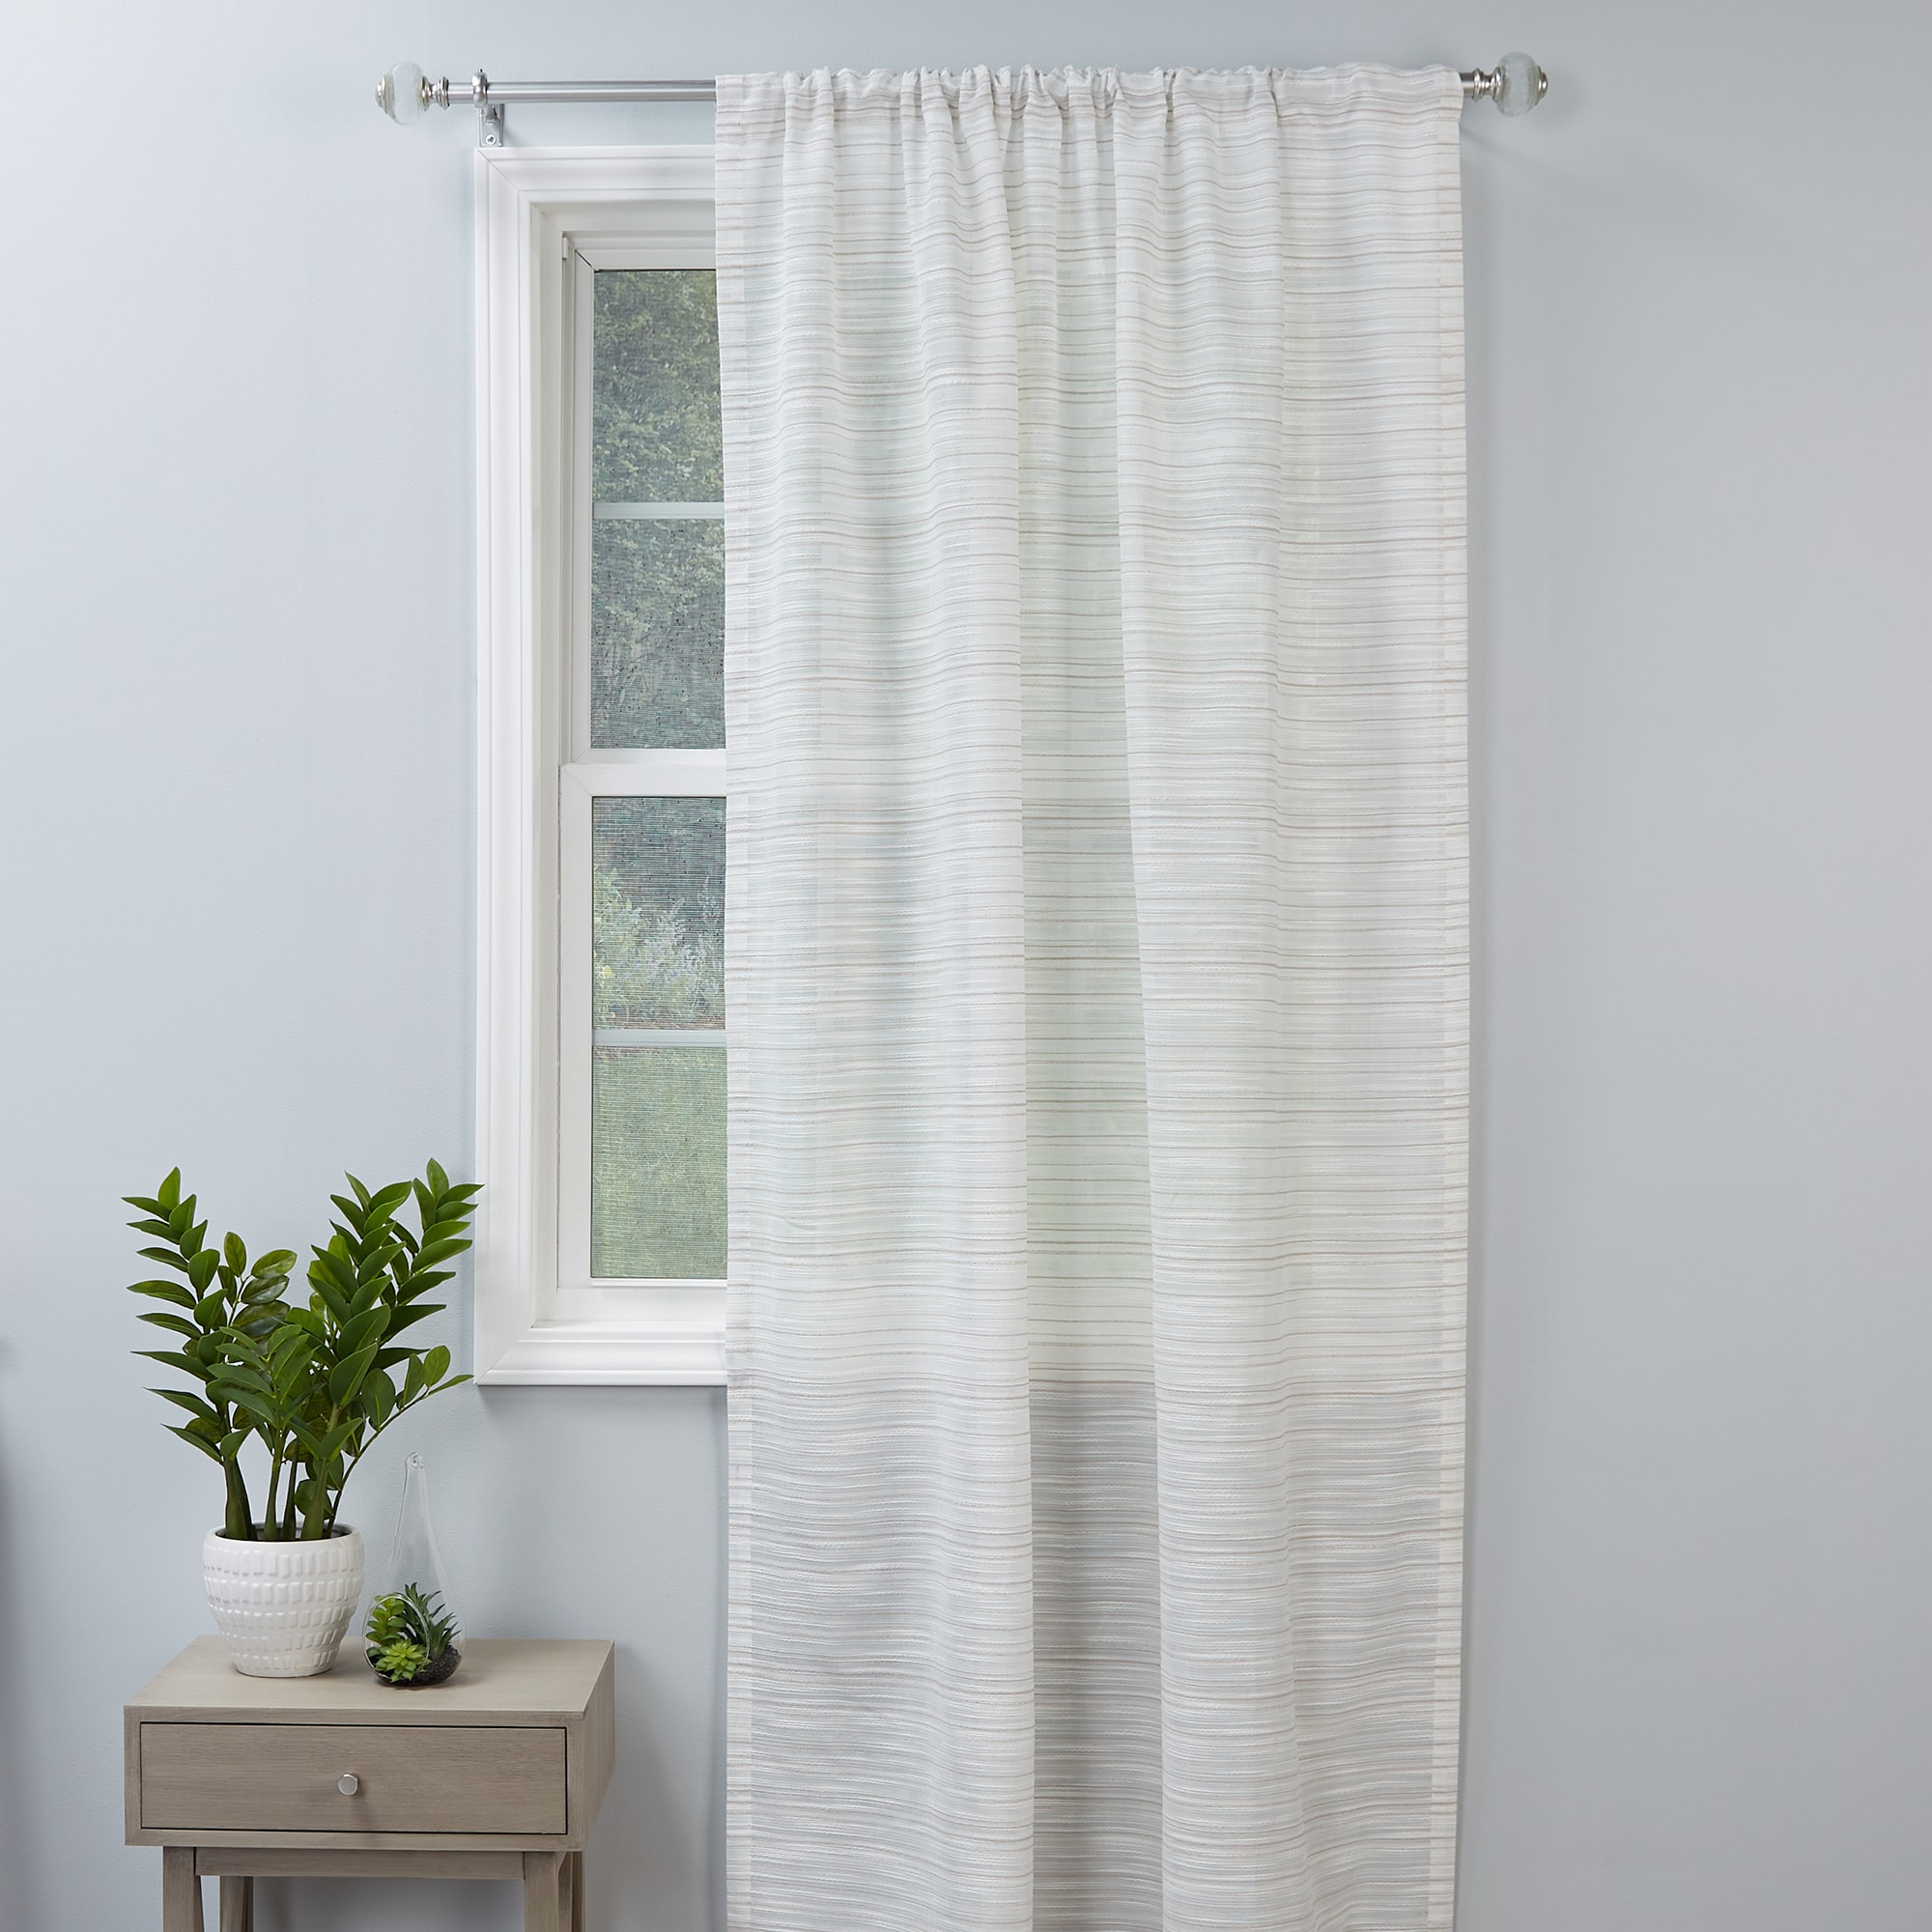 Filtering Curtains Panel Single Taupe at the Curtain Light + Pocket Drapes Rod 84-in & in allen department roth